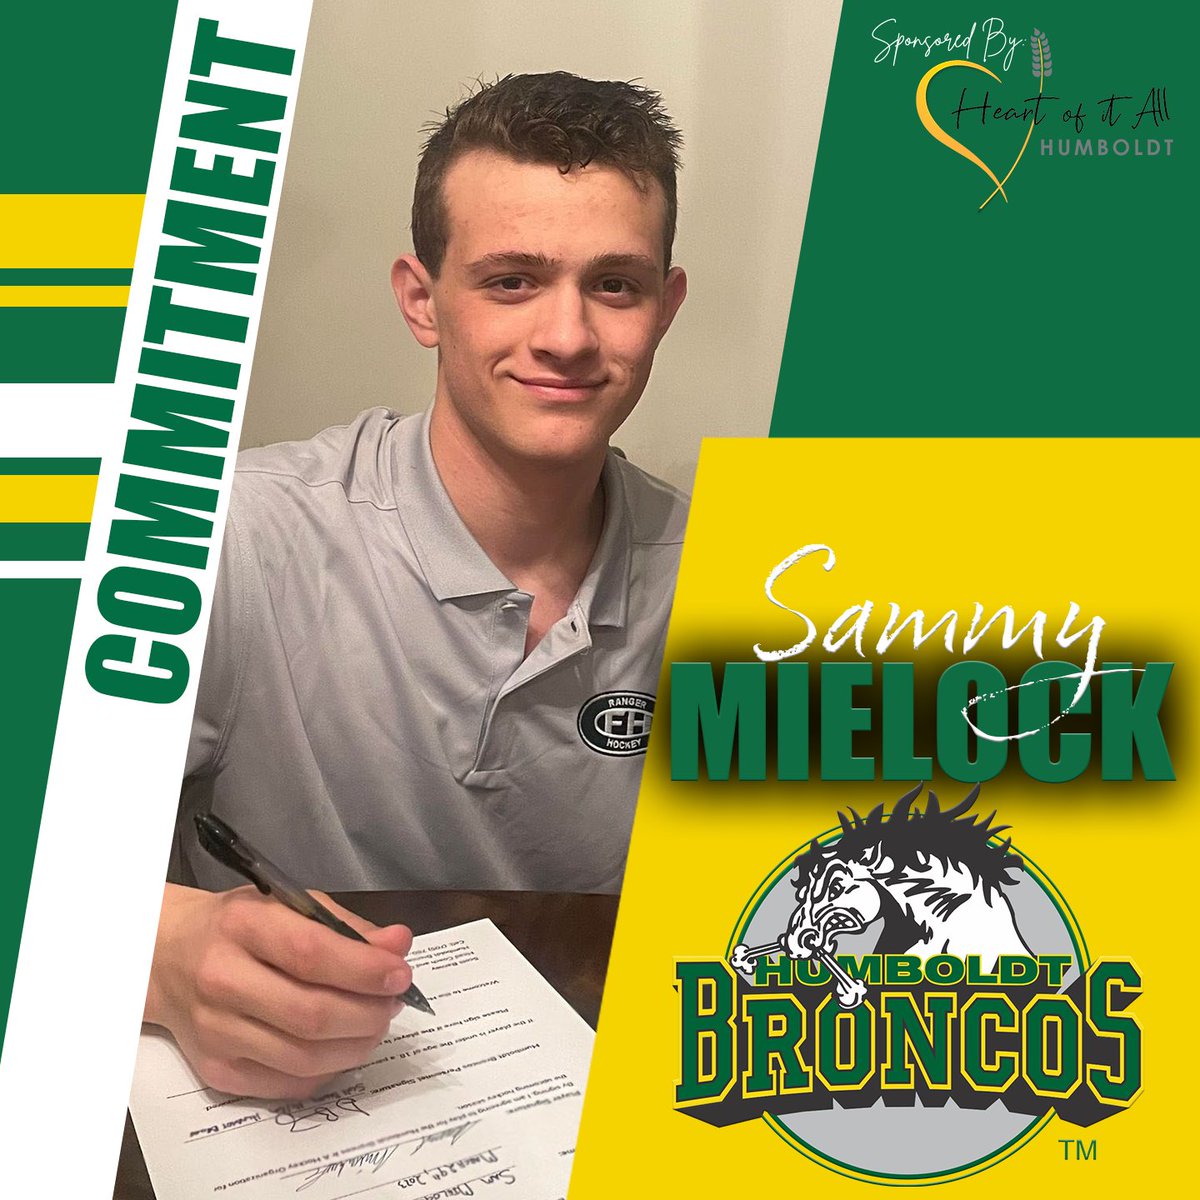 🚨#TeamTransaction sponsored by @CityofHumboldt_ The Humboldt Broncos are happy to announce that Sammy Mielock (04) has committed to playing for the Broncos for the 2023/24 SJHL season. 👇Read all about it here 👇 humboldtbroncos.com/04-forward-sam…